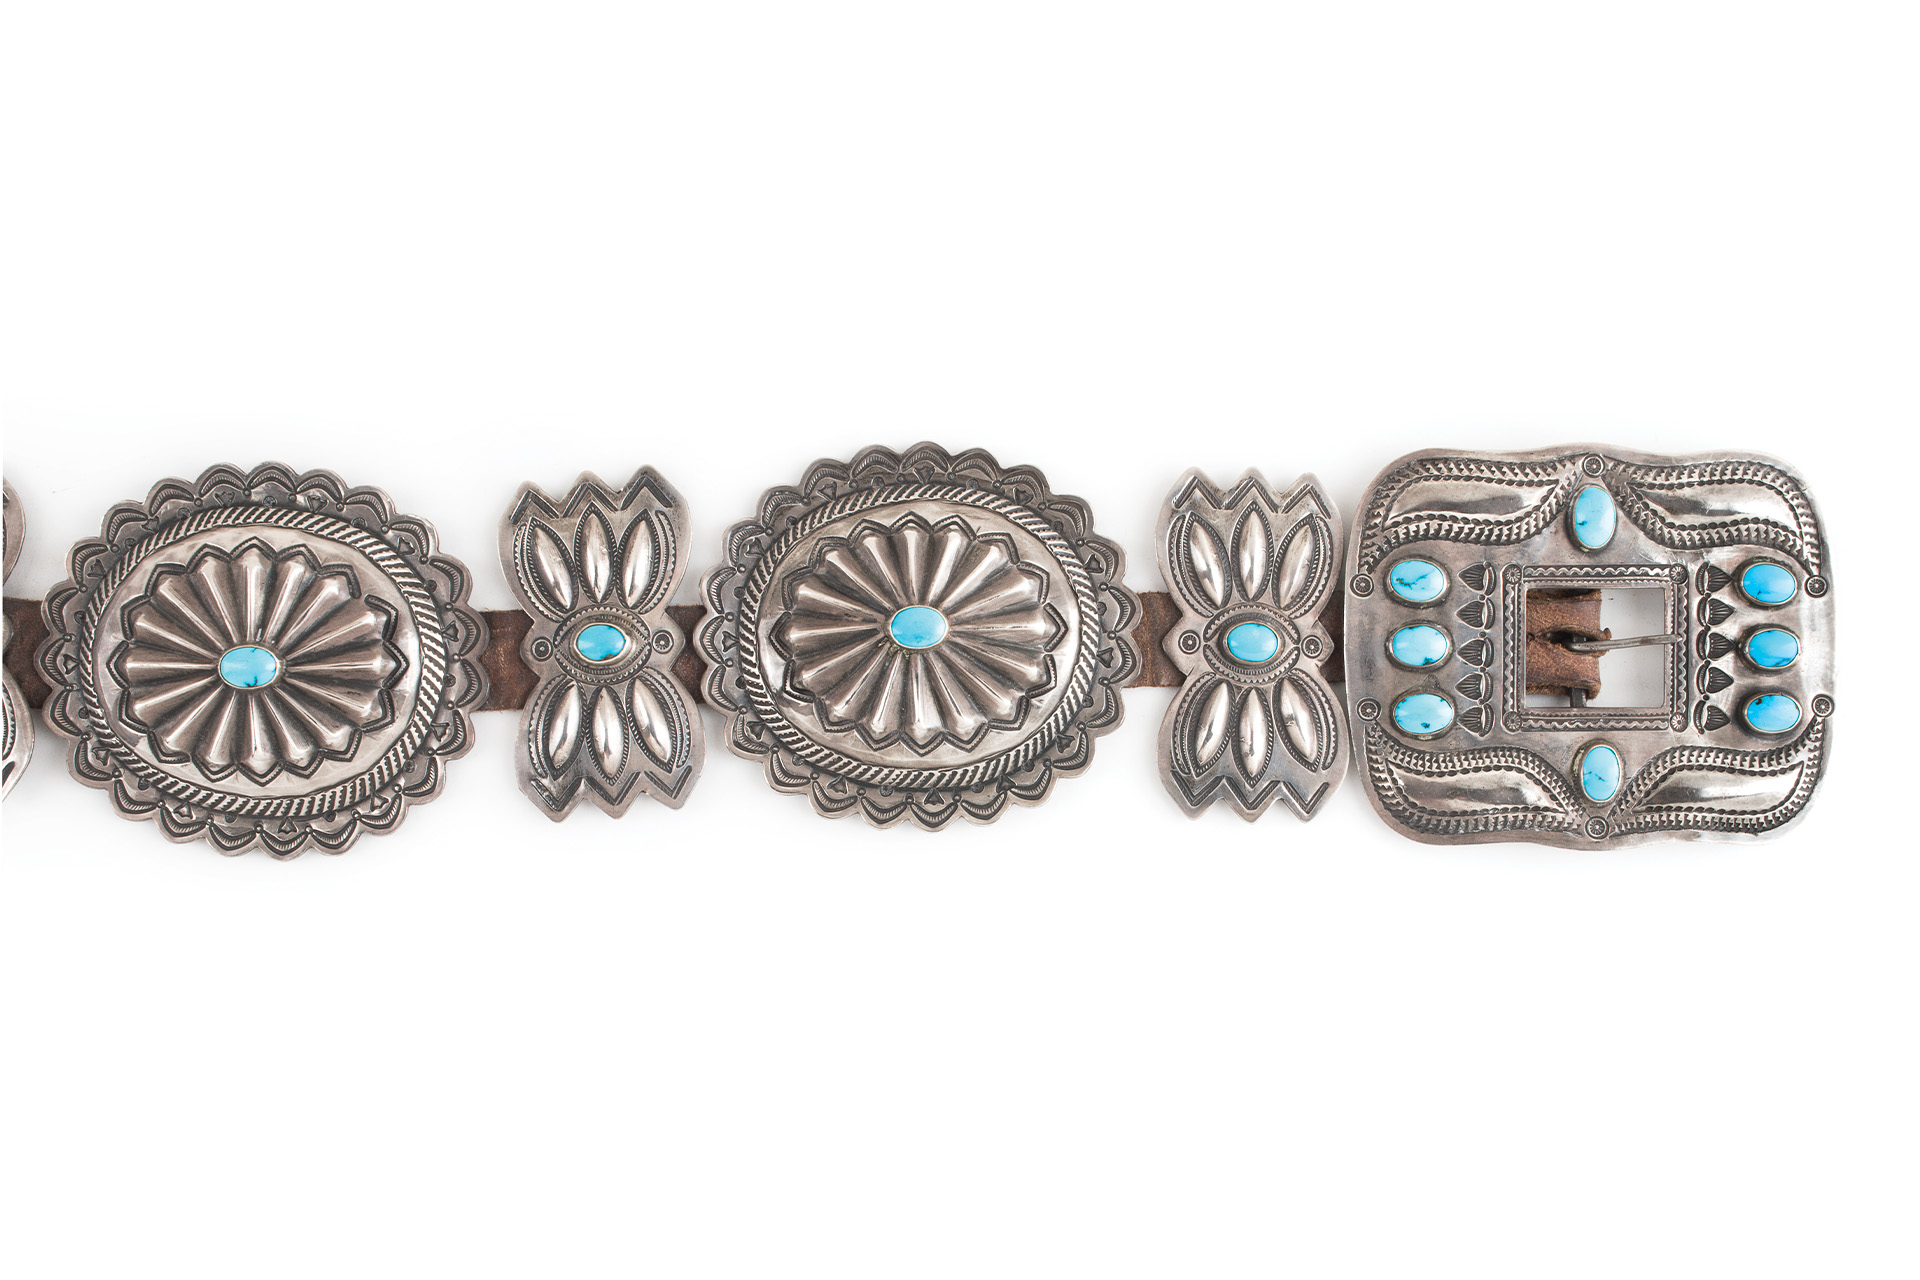 A silver belt with turquoise stones.